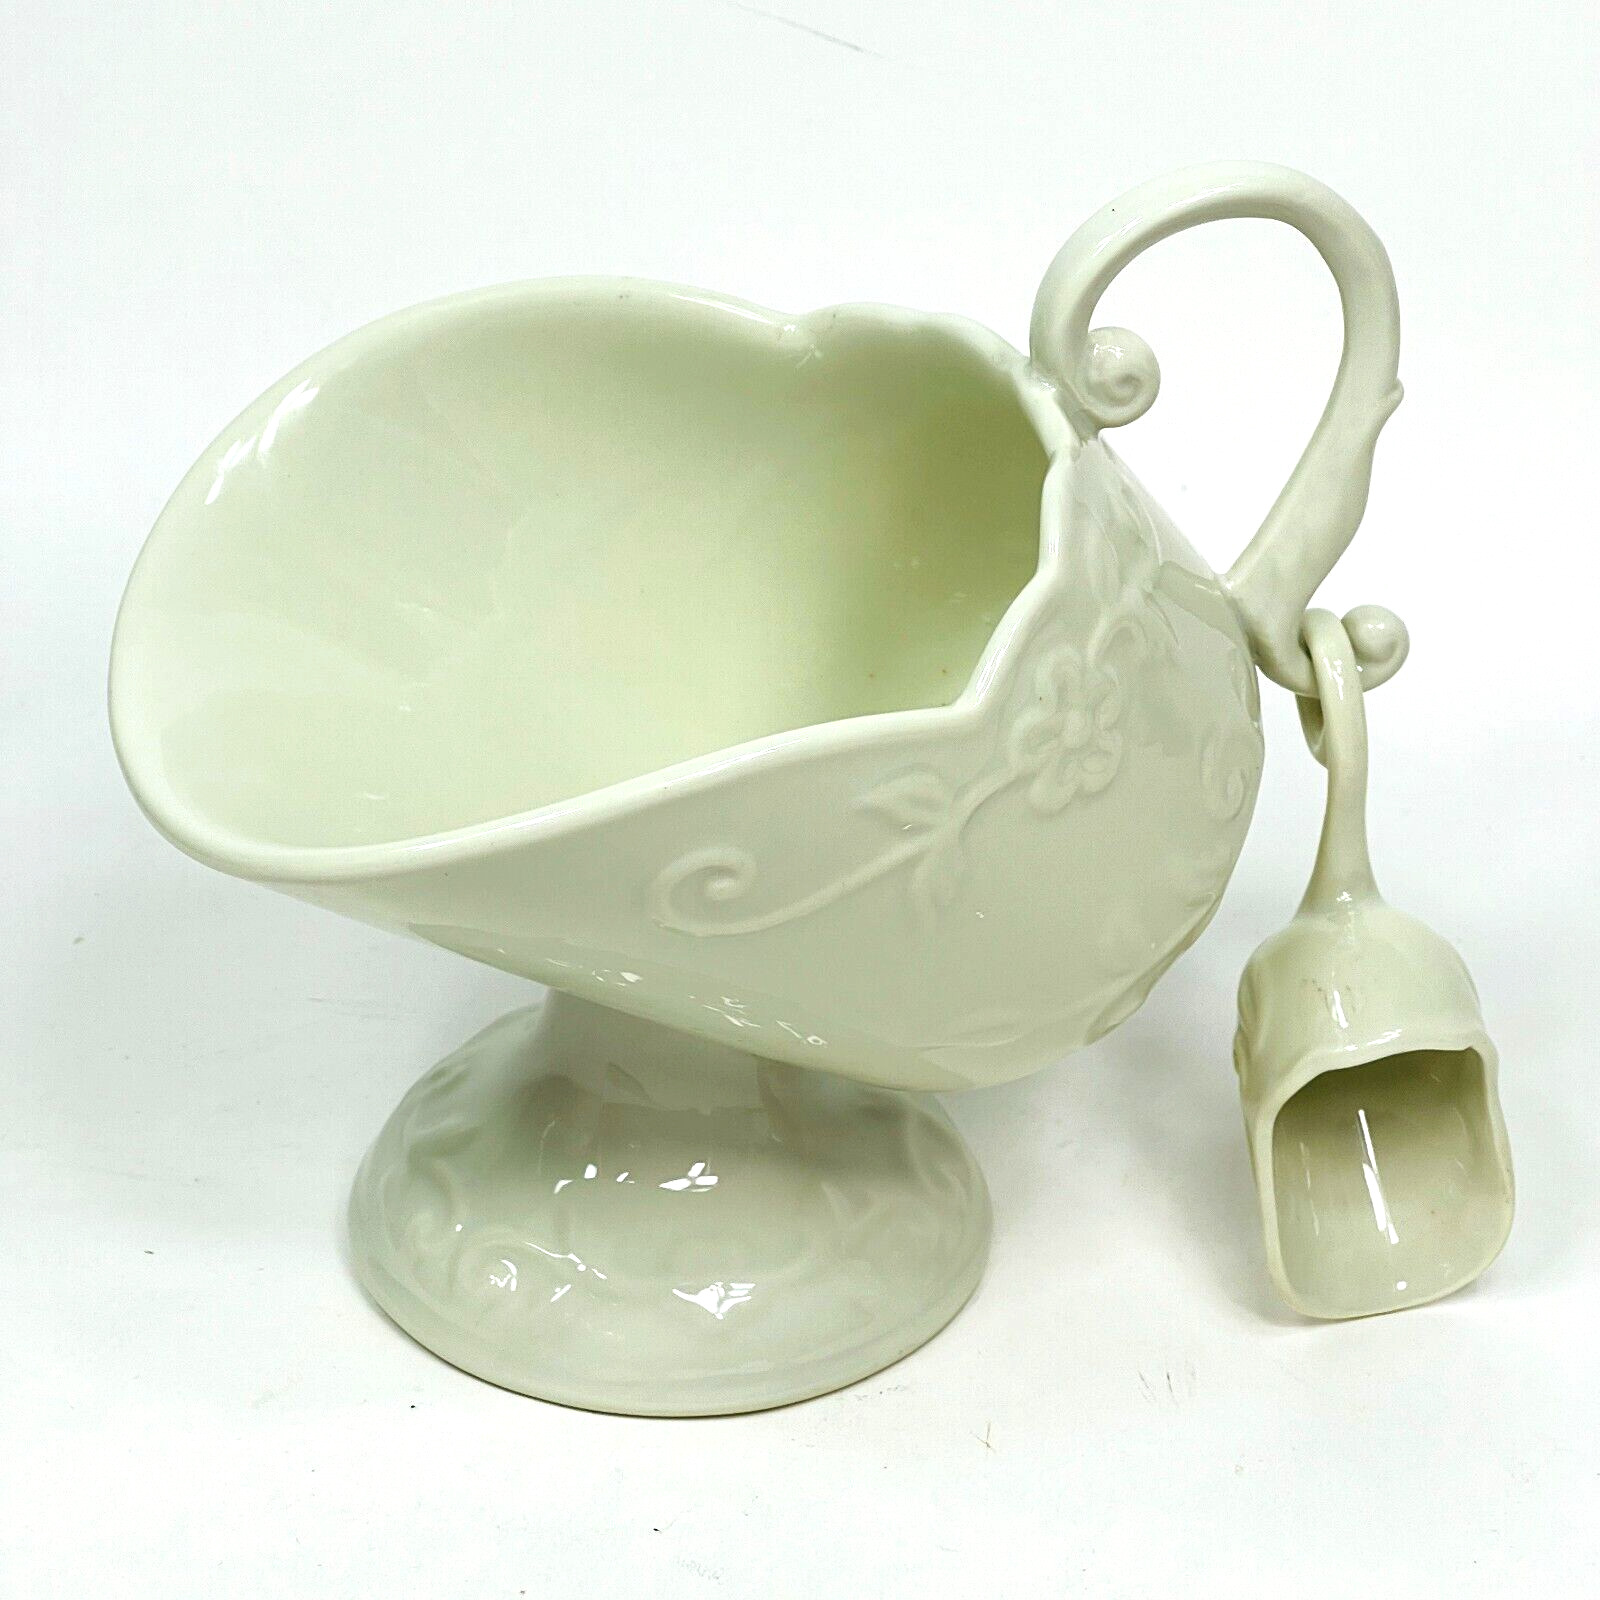 Mint or Nut Server and Scoop White Vintage Victorian Design A Special Place 2004